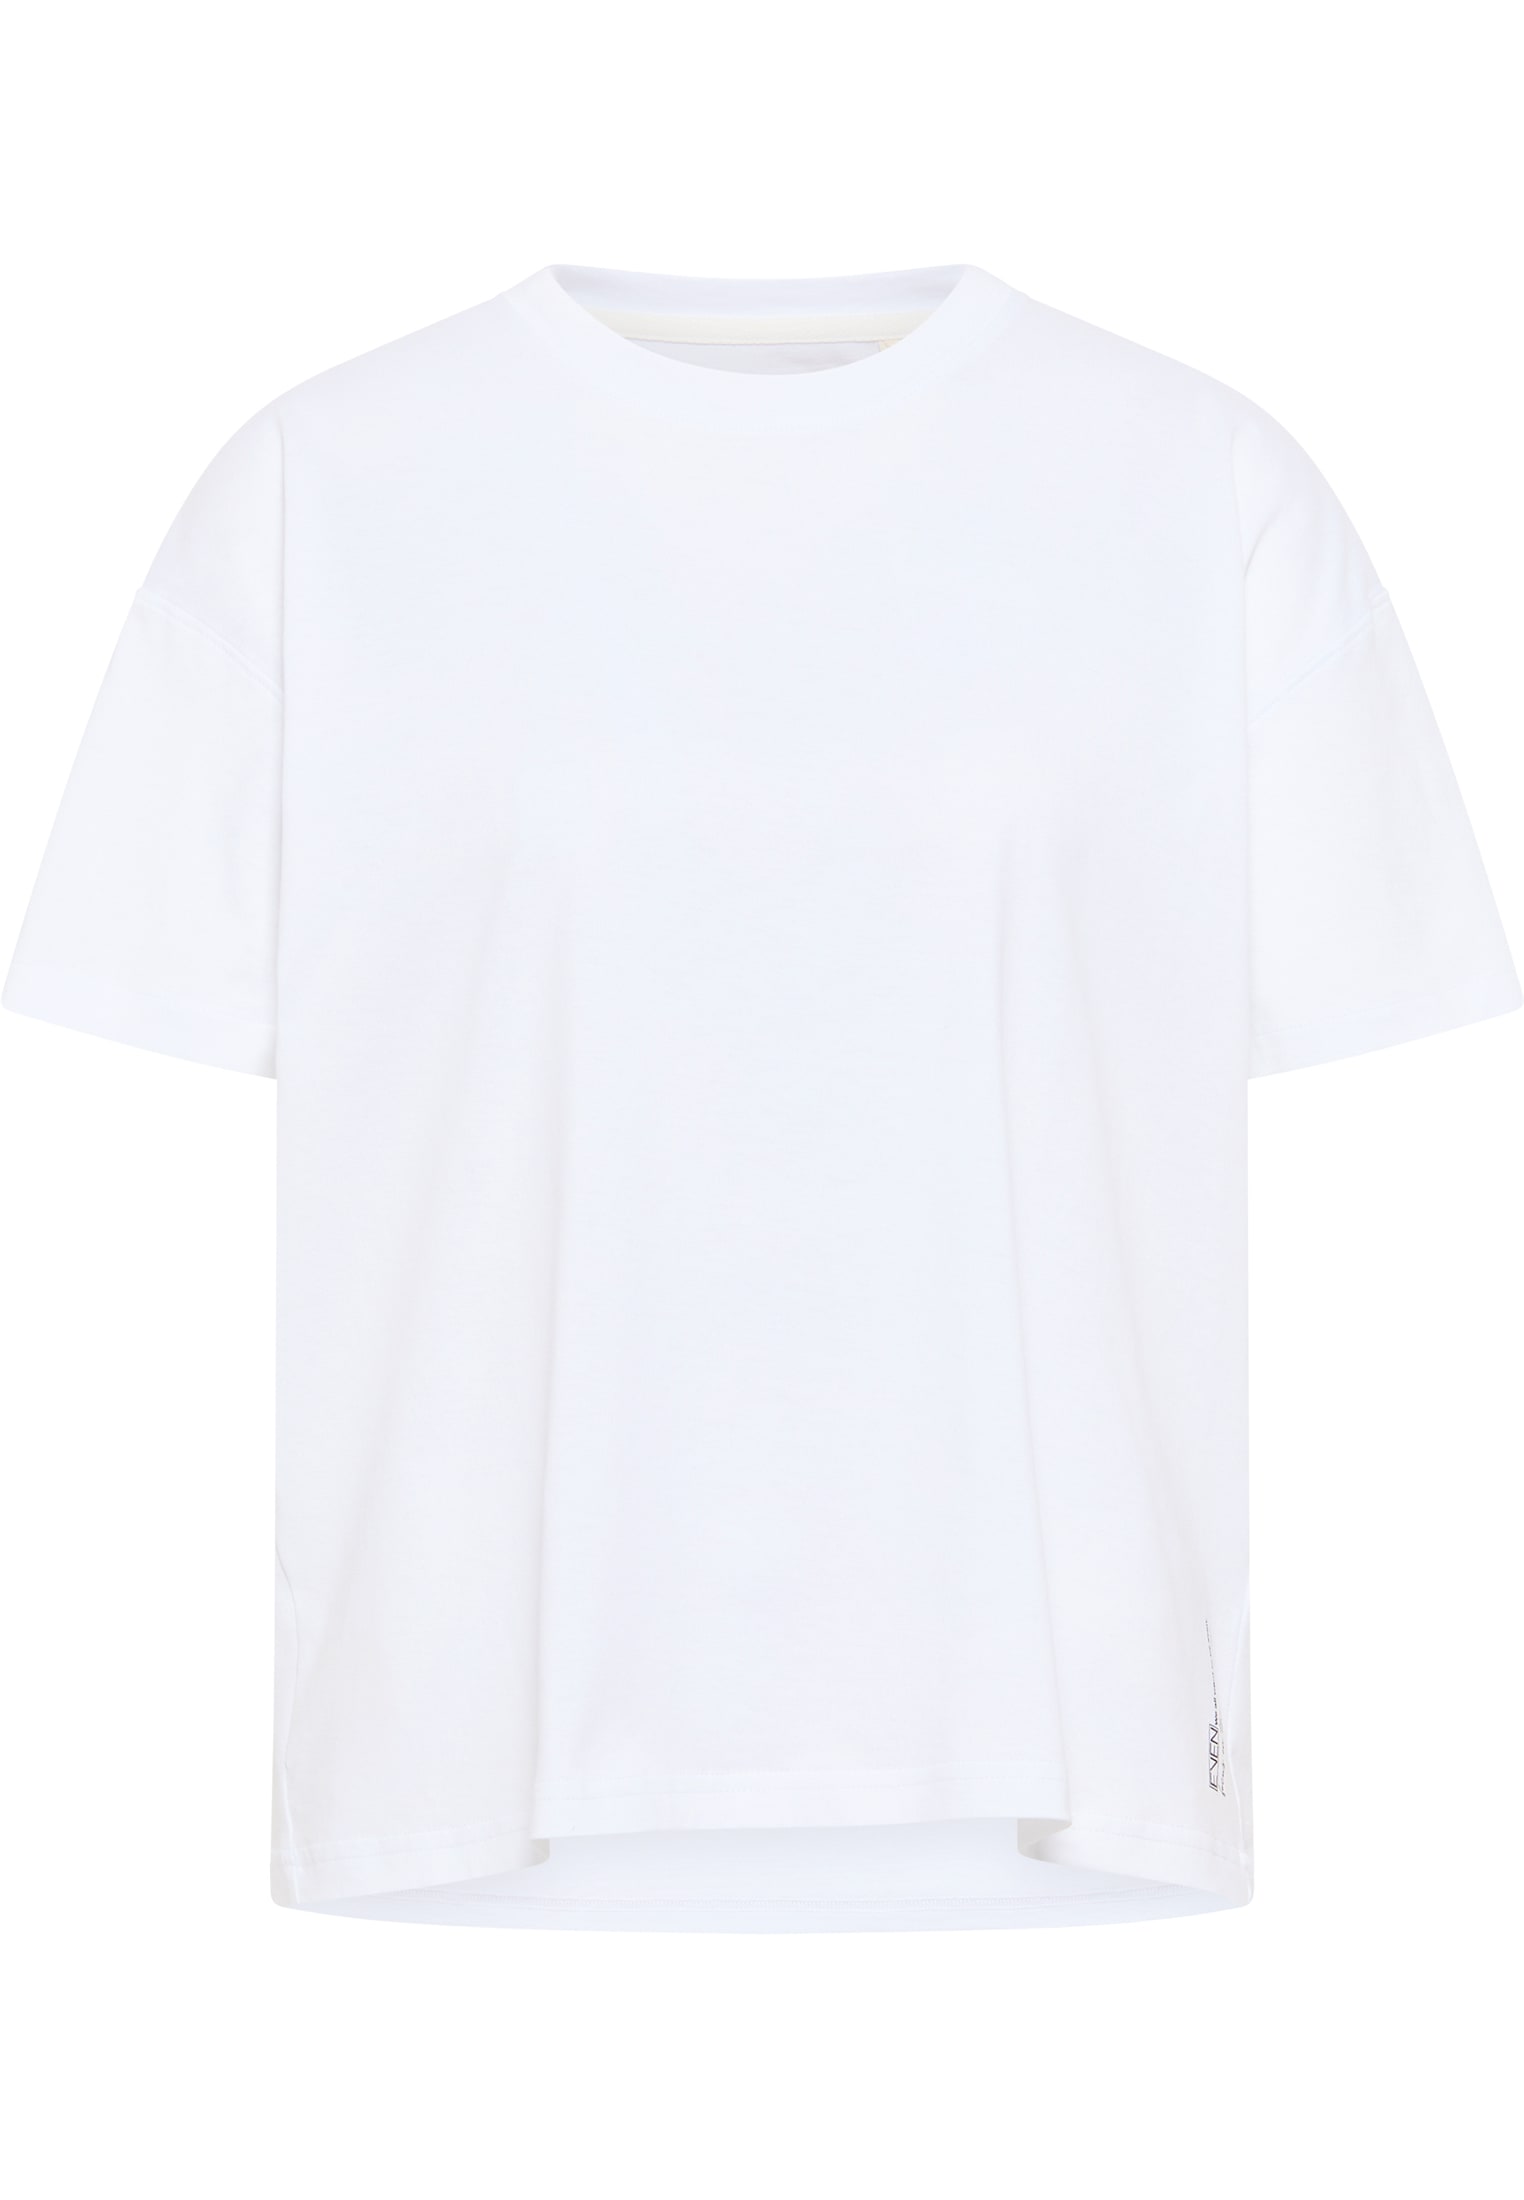 Shirt in off-white printed